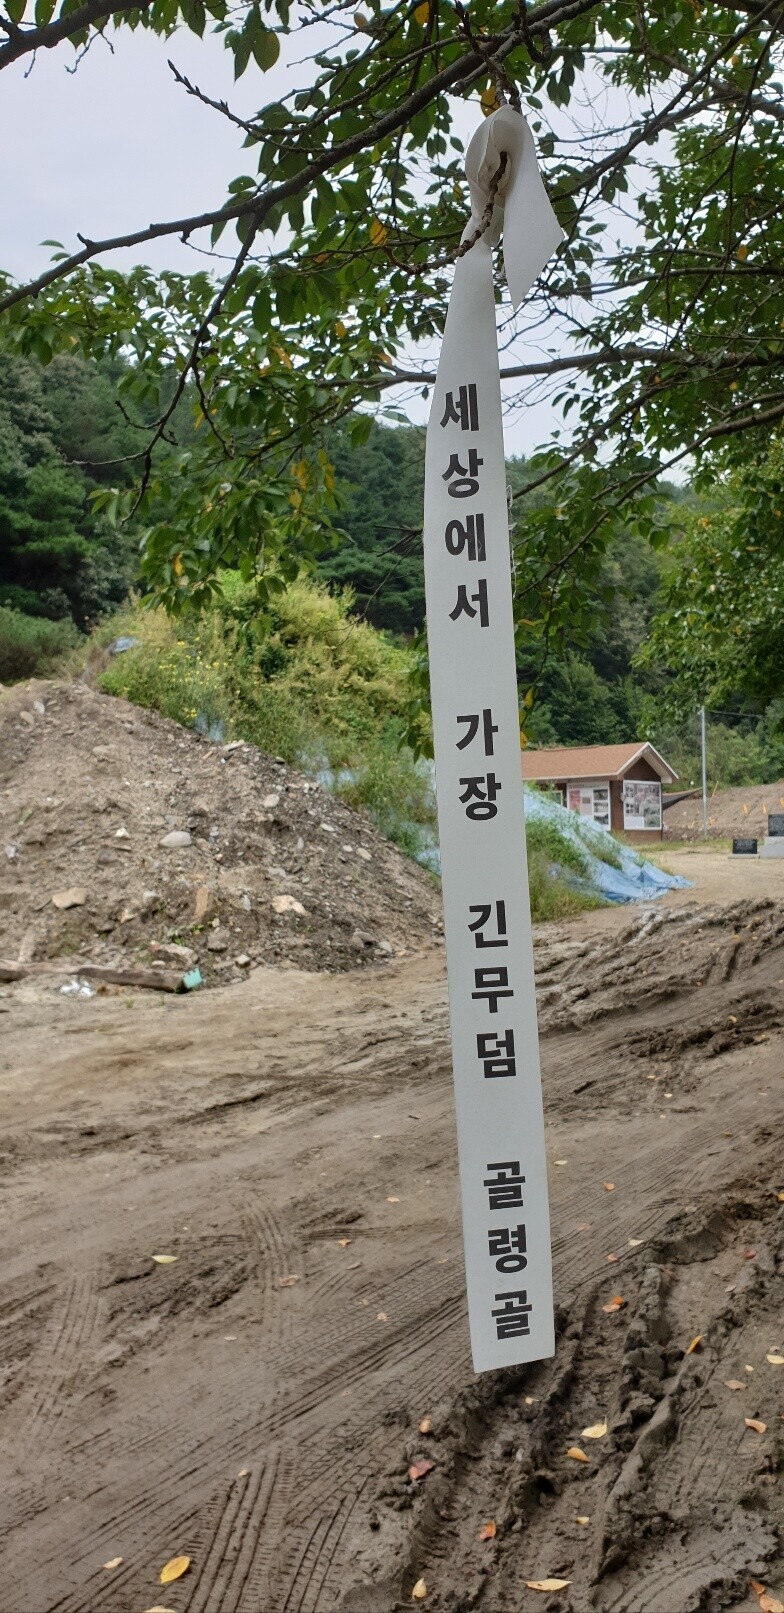 A ribbon reading “The longest grave in the world: Gollyeong Valley” hangs on a tree branch at the entrance to the valley in August 2021. (Choi Ye-rin/The Hankyoreh)